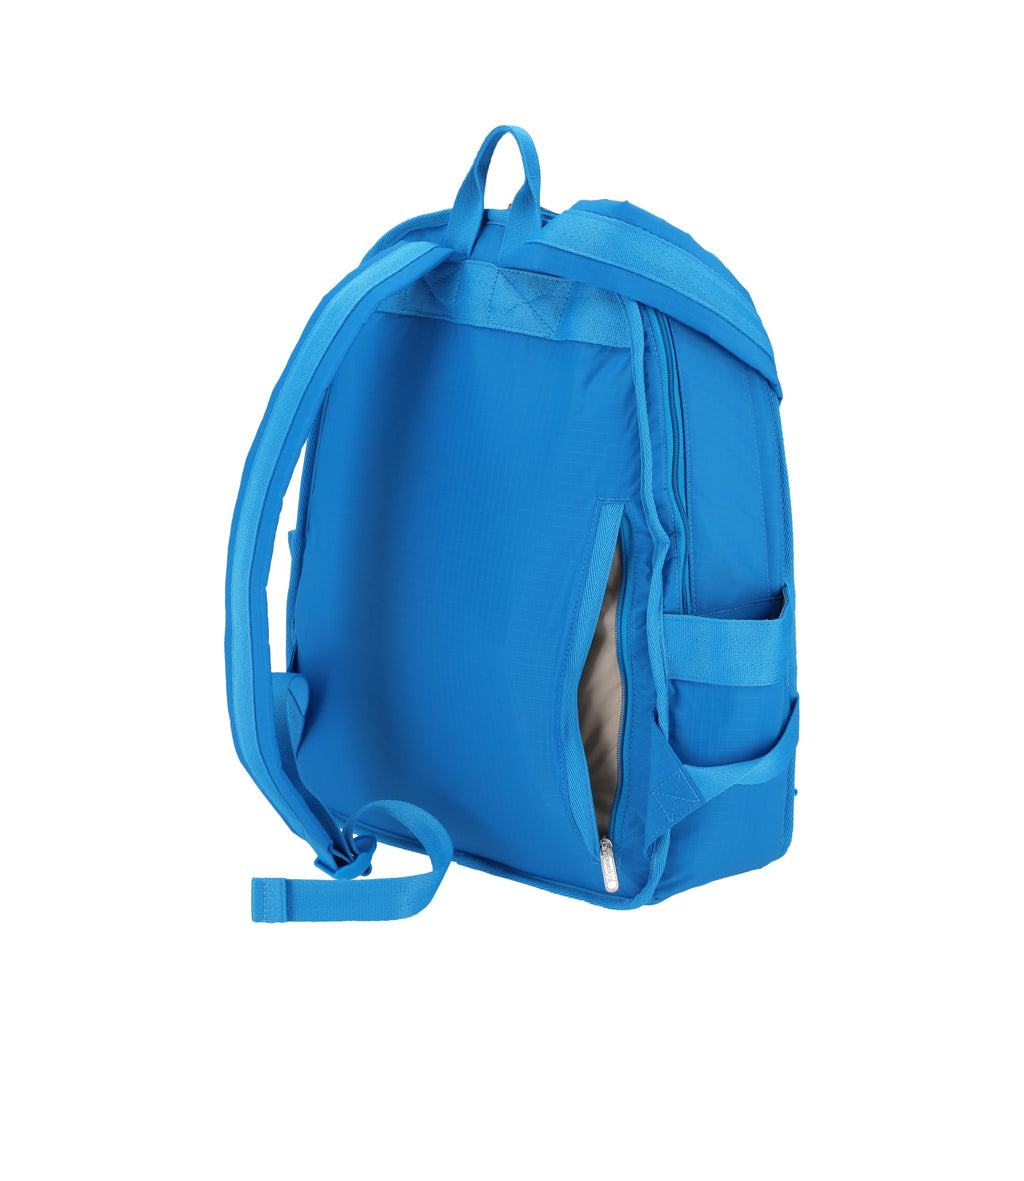 Route Backpack - 24737025982512